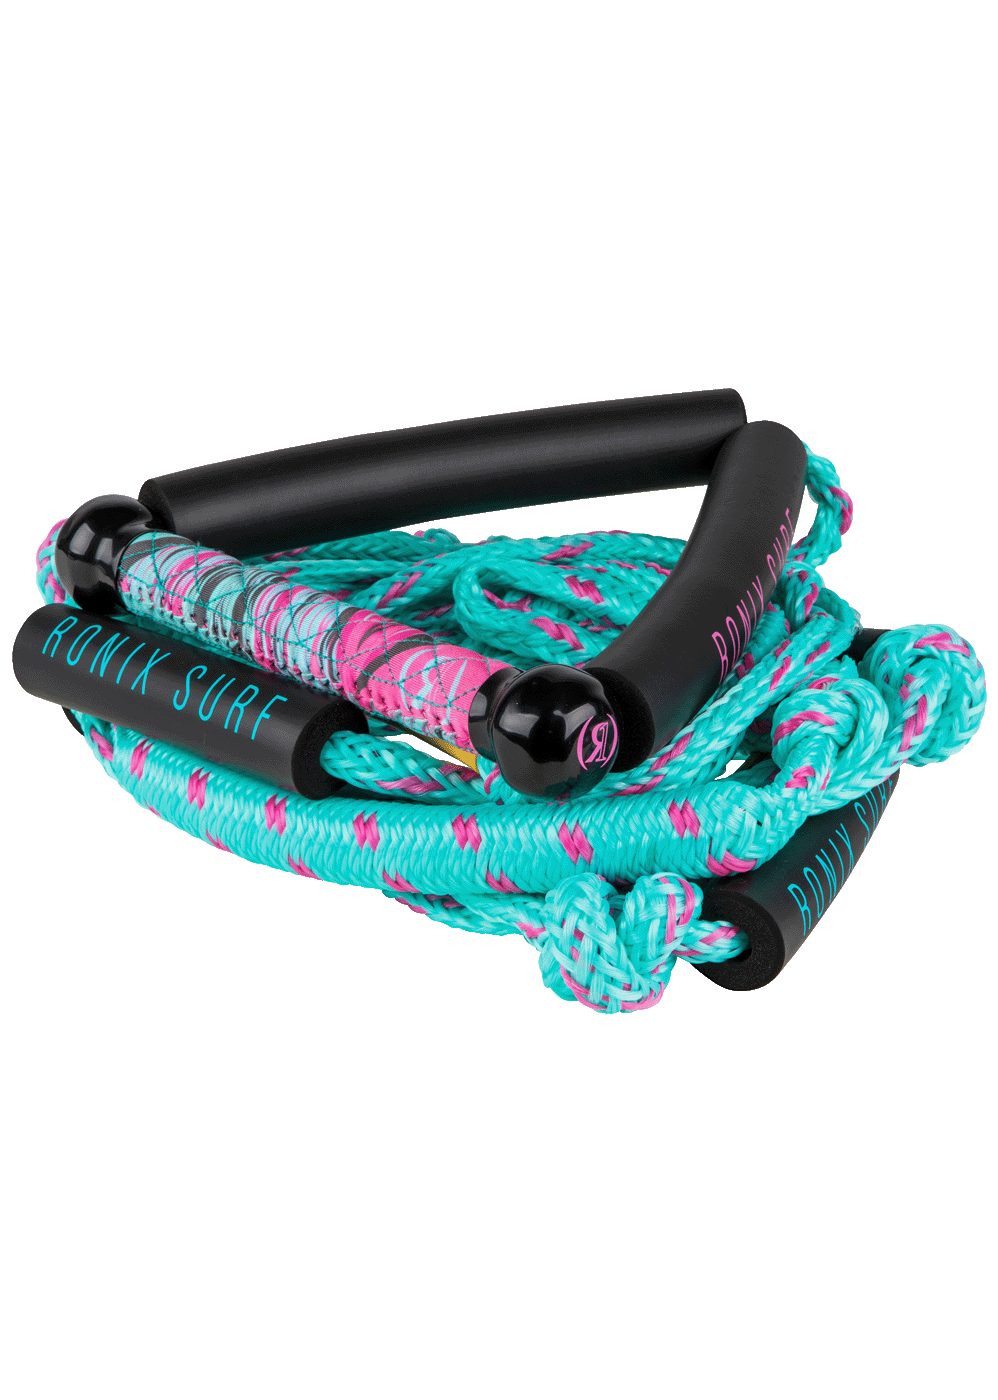 Women's Stretch Surf Rope / Handle